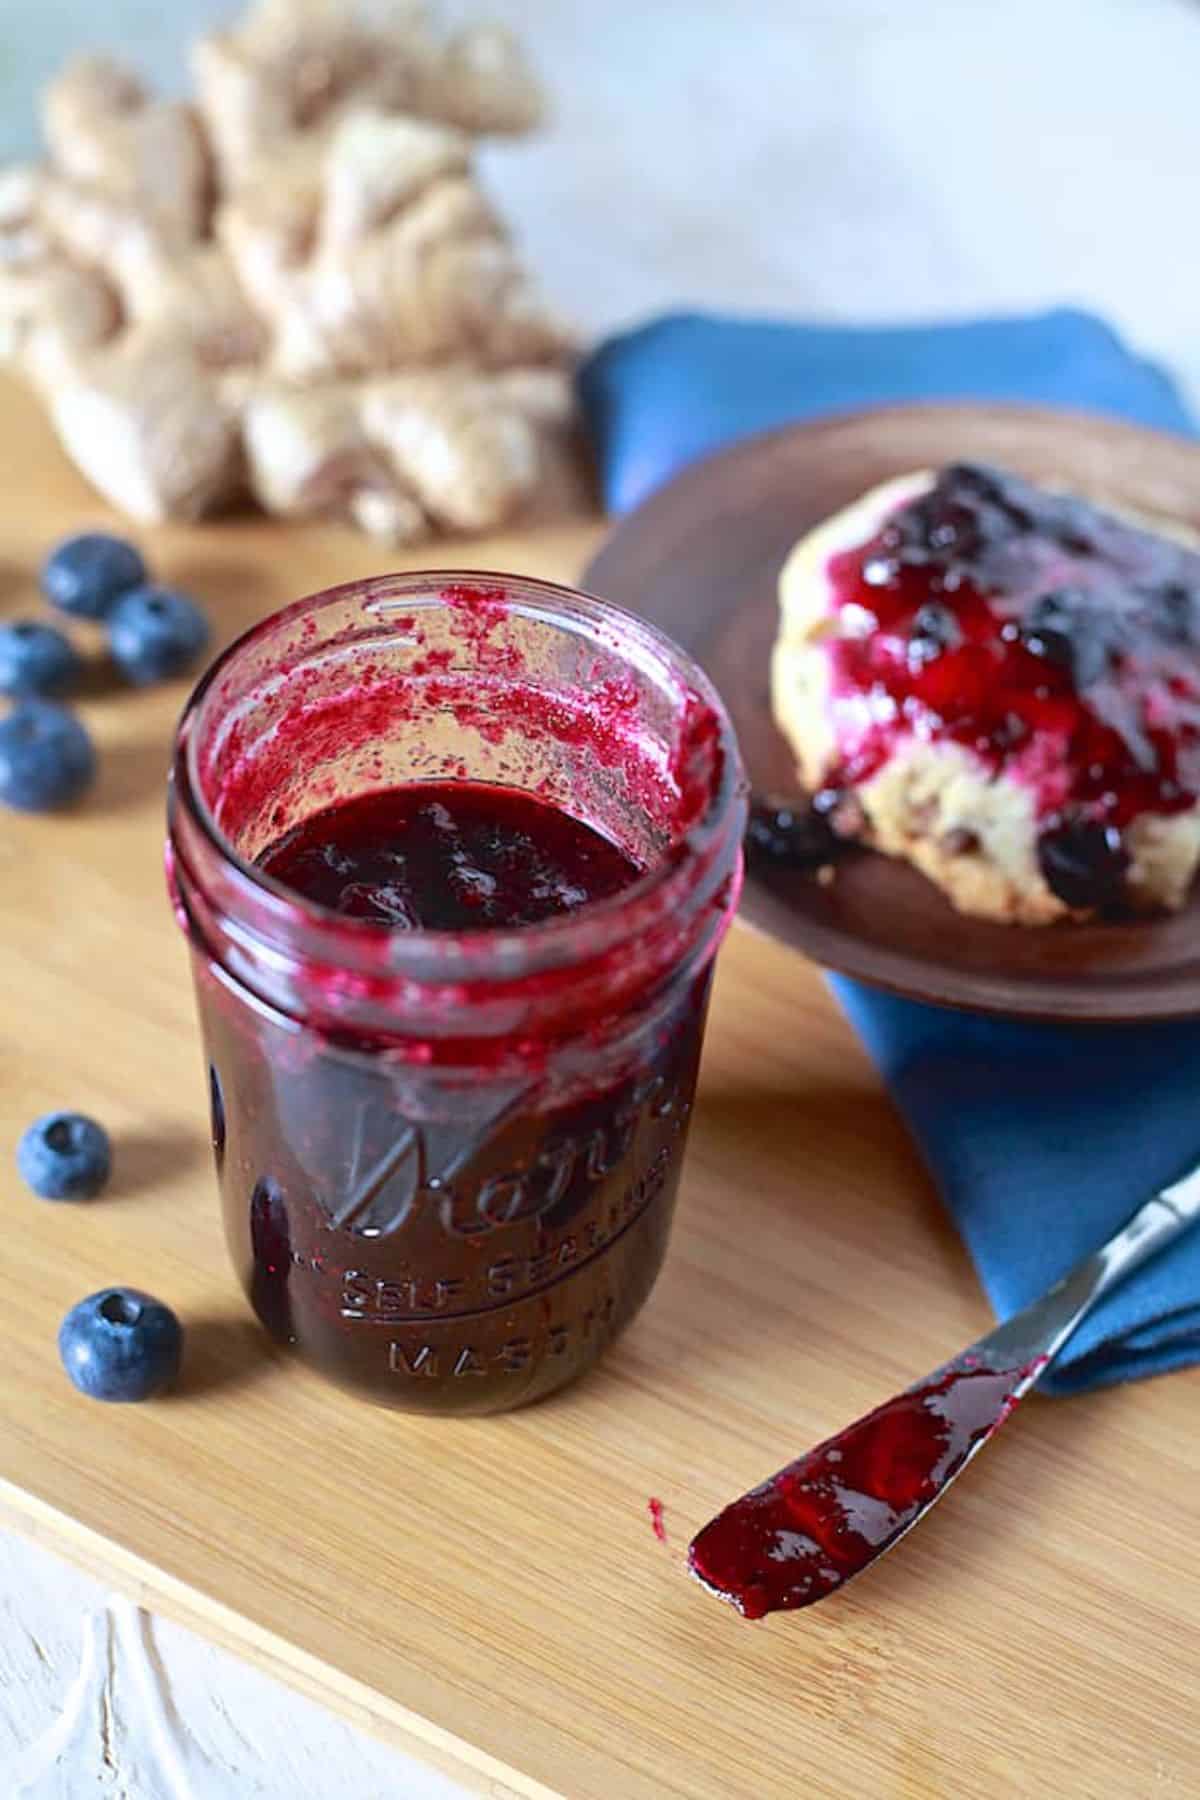 Blueberry ginger jam in a glass jar on a wooden tray.